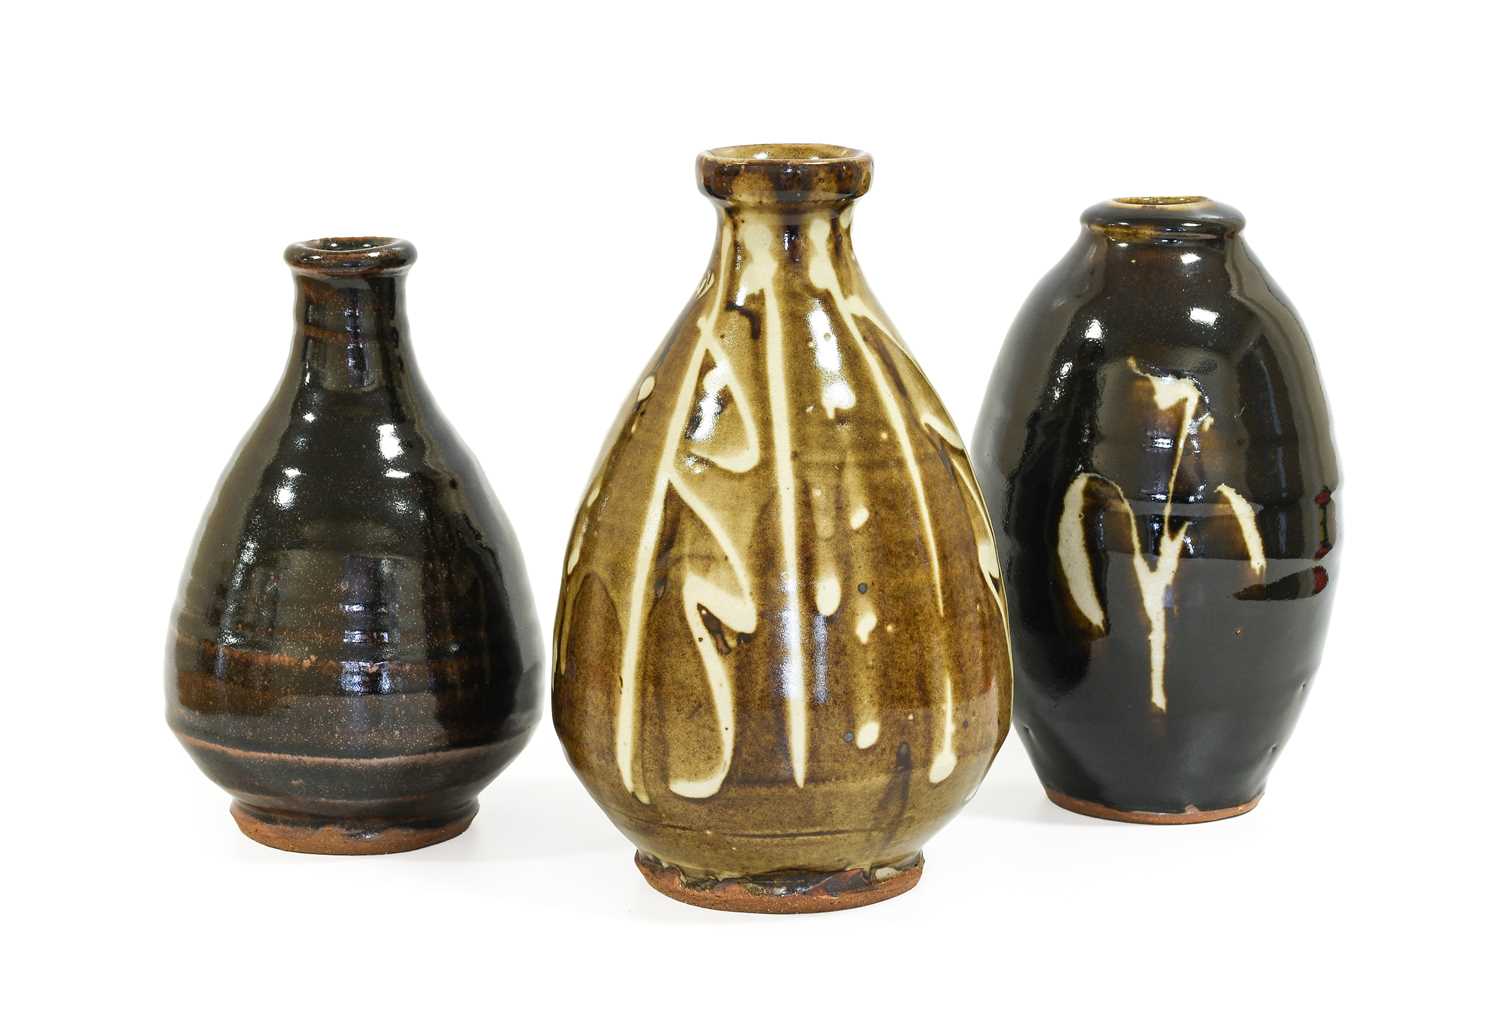 Mike Dodd (b.1943): A Stoneware Bottle Vase, covered in kaki Penlee glaze with wax resist